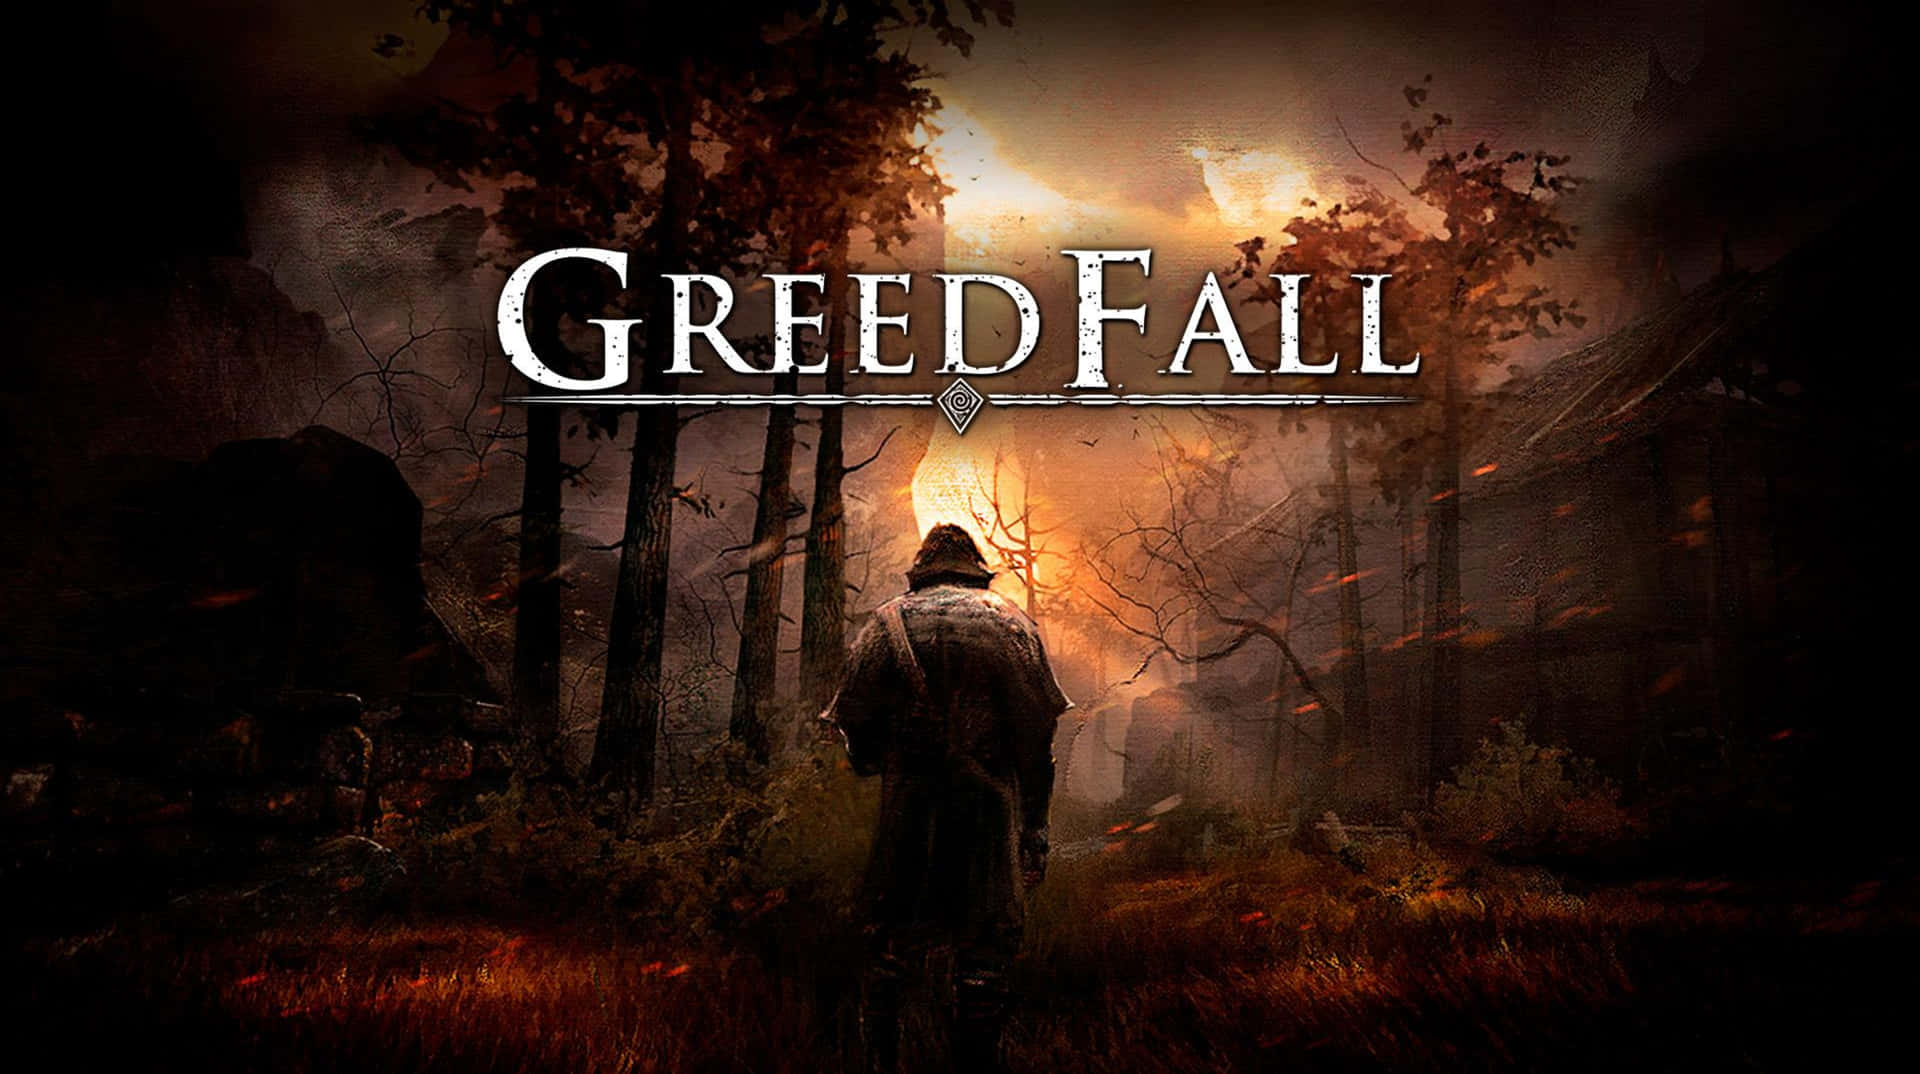 Hd Greedfall Background Game Title Poster Warrior Wallpaper